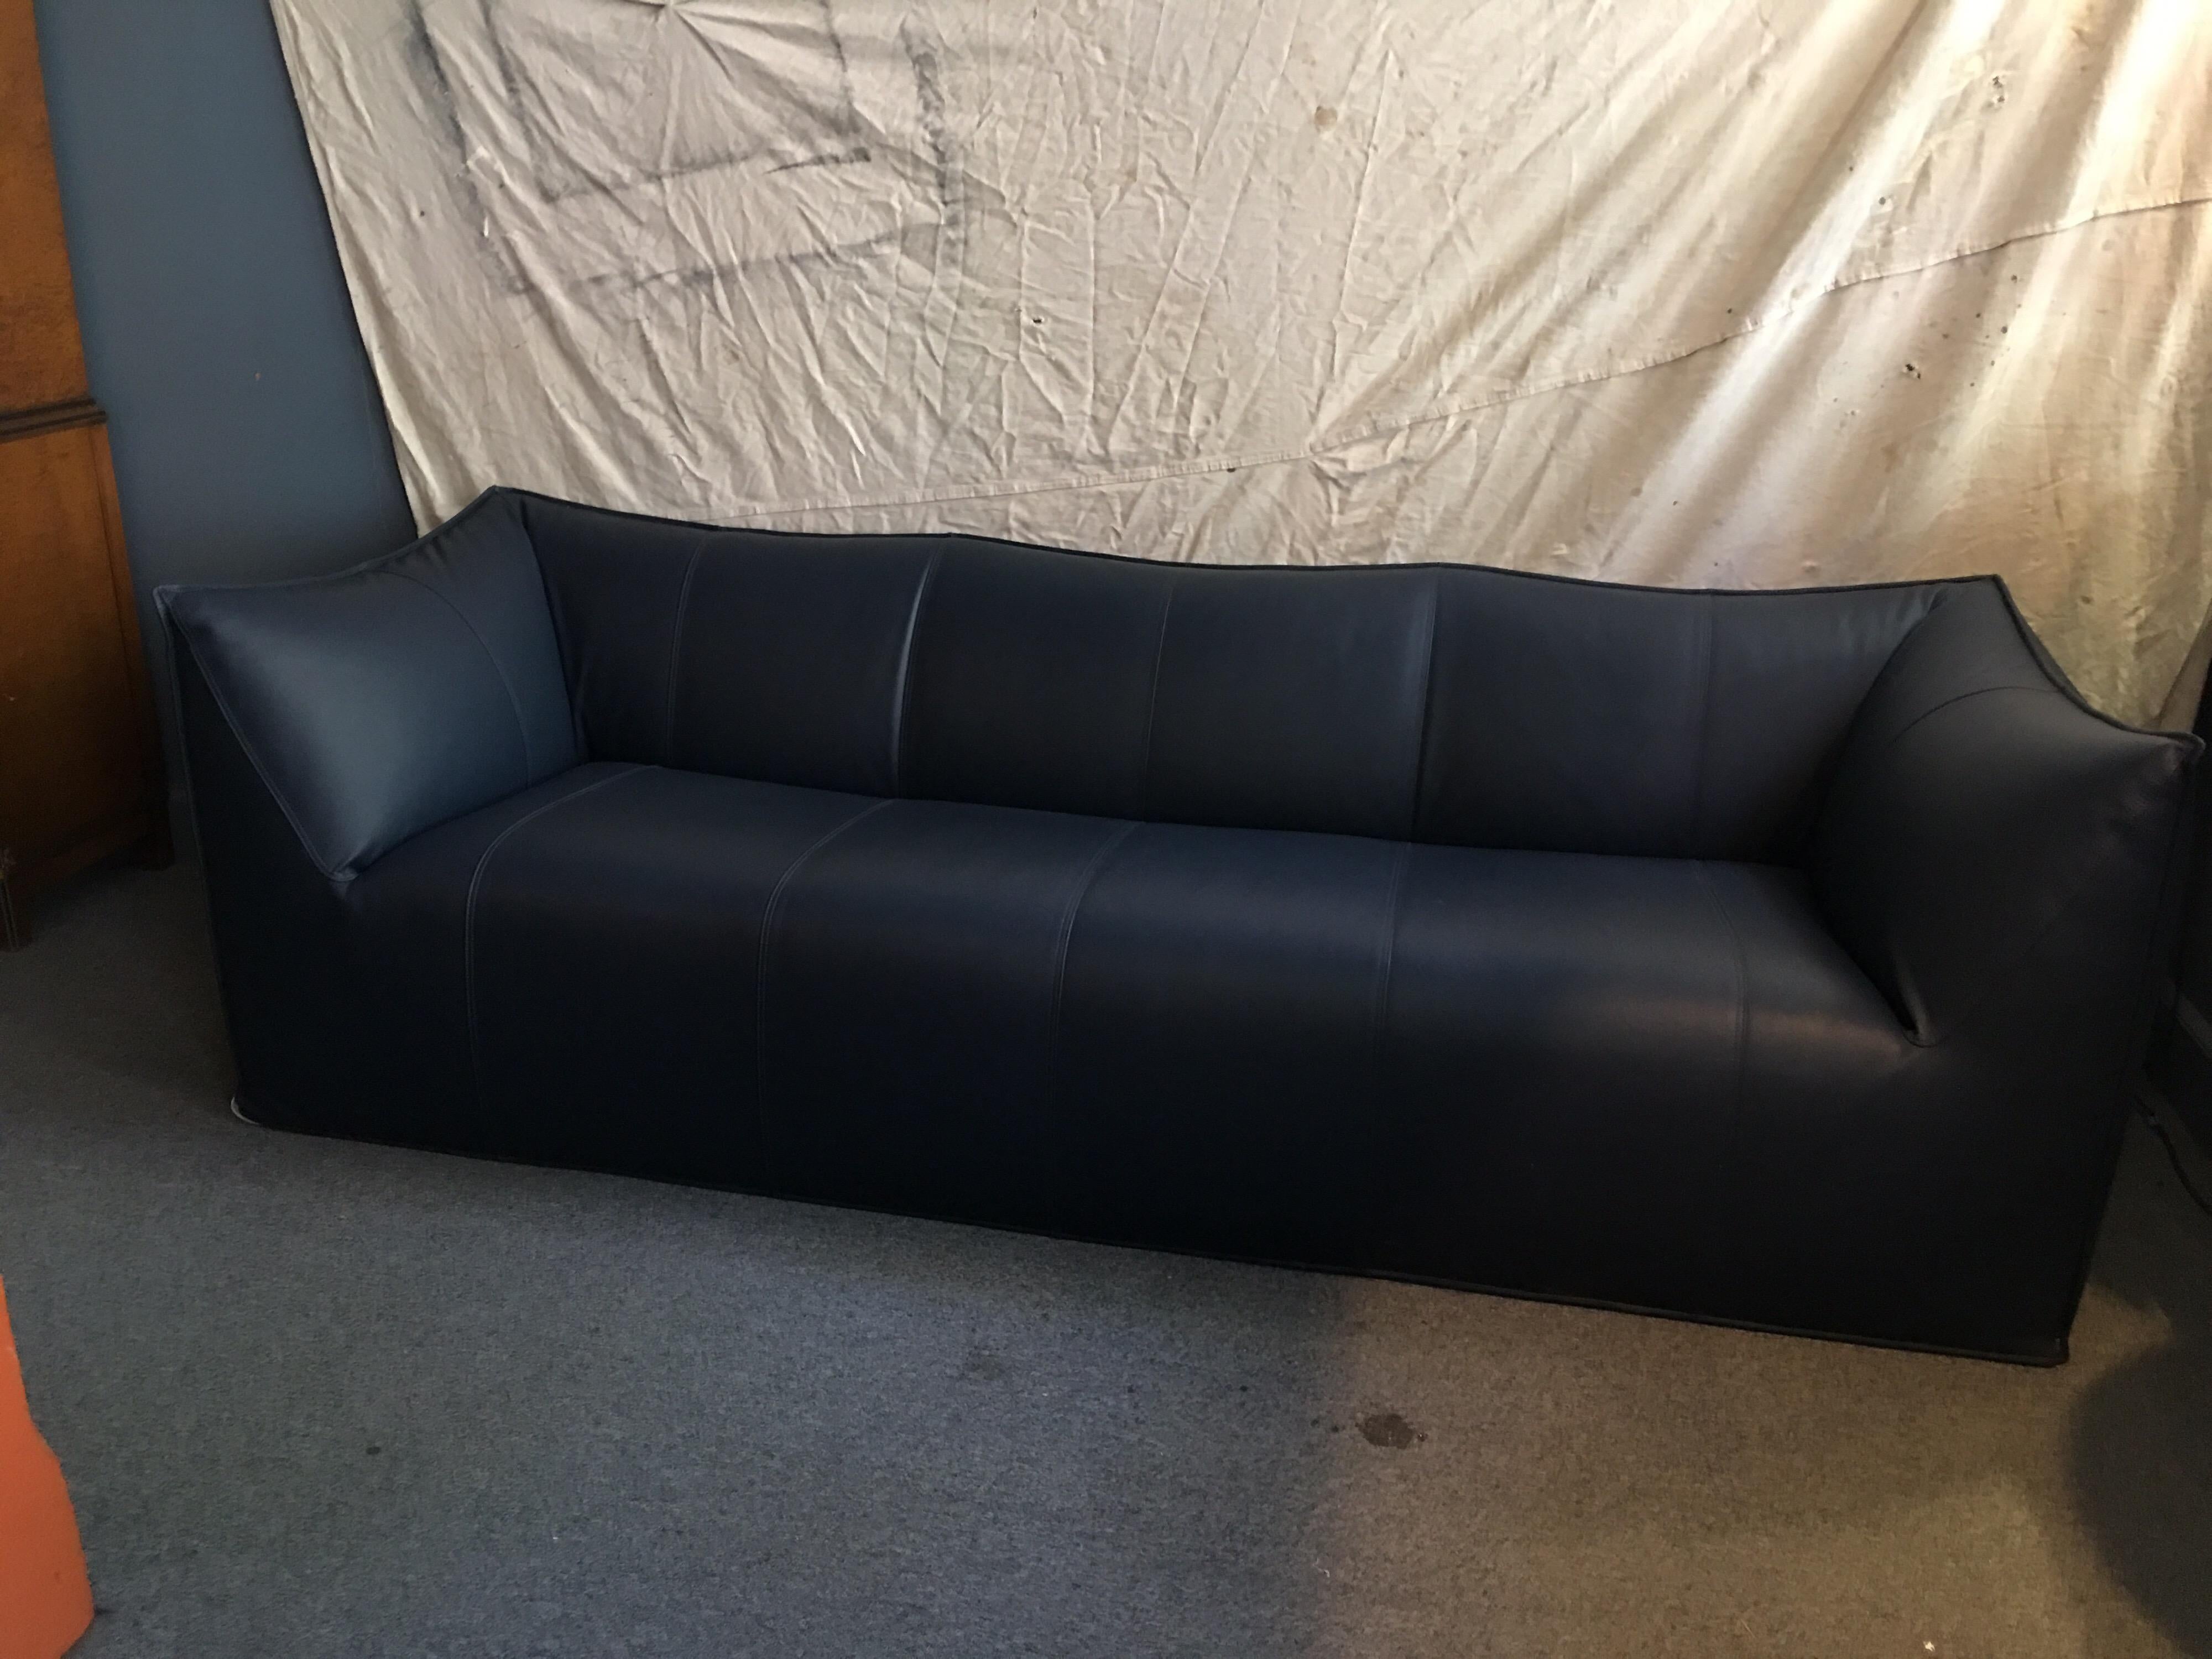 3-seat Mario Bellini for Cassina Le Bambole sofa. Early 1970s design, this model 3 years old! Near perfect condition! Beautiful dark blue leather!